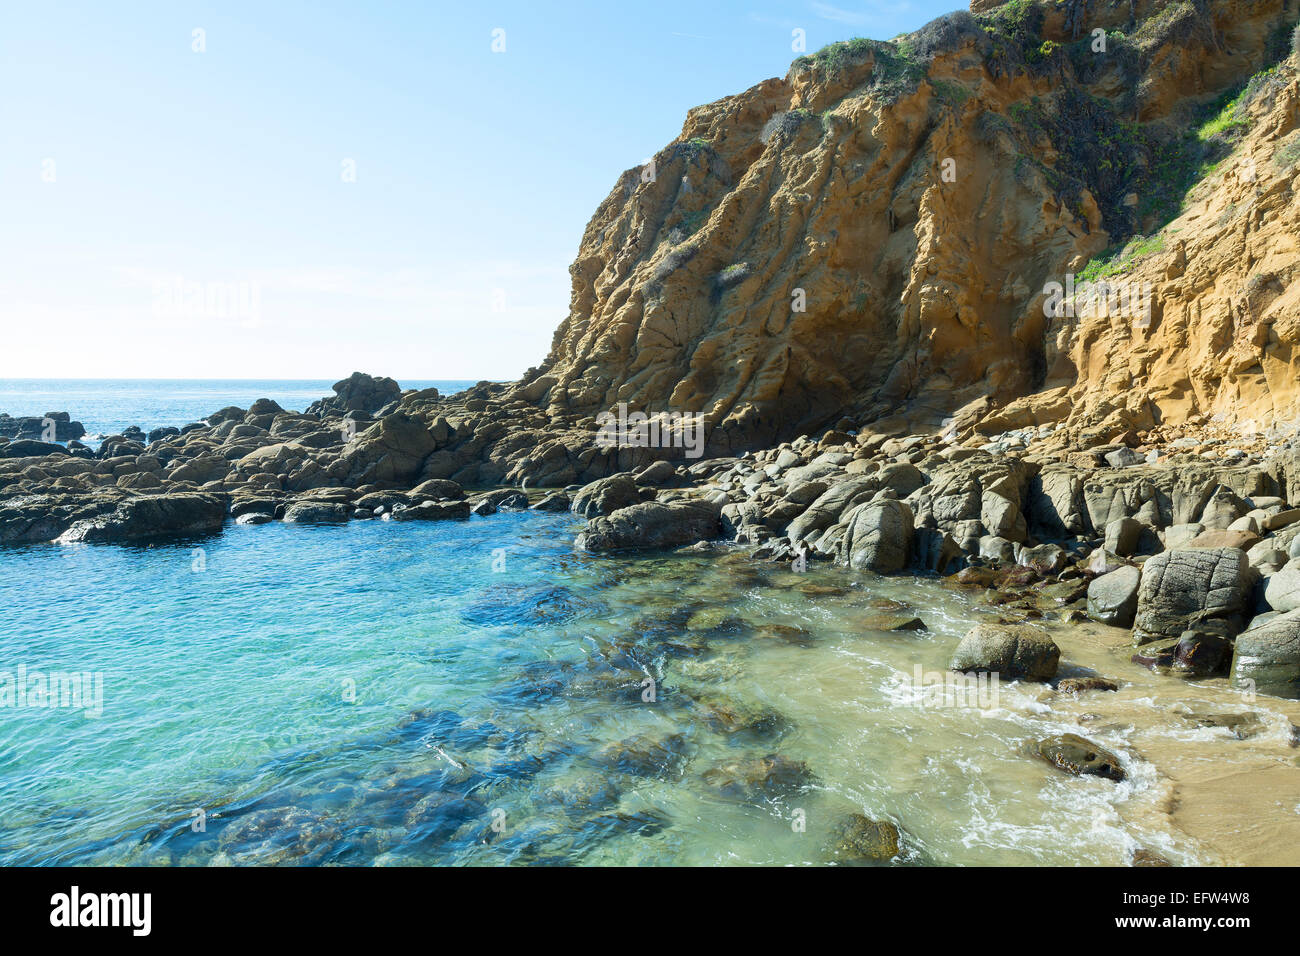 A small, secluded ocean front cove with large, smooth boulders embraces gentle surf bouncing off the large rocks Stock Photo